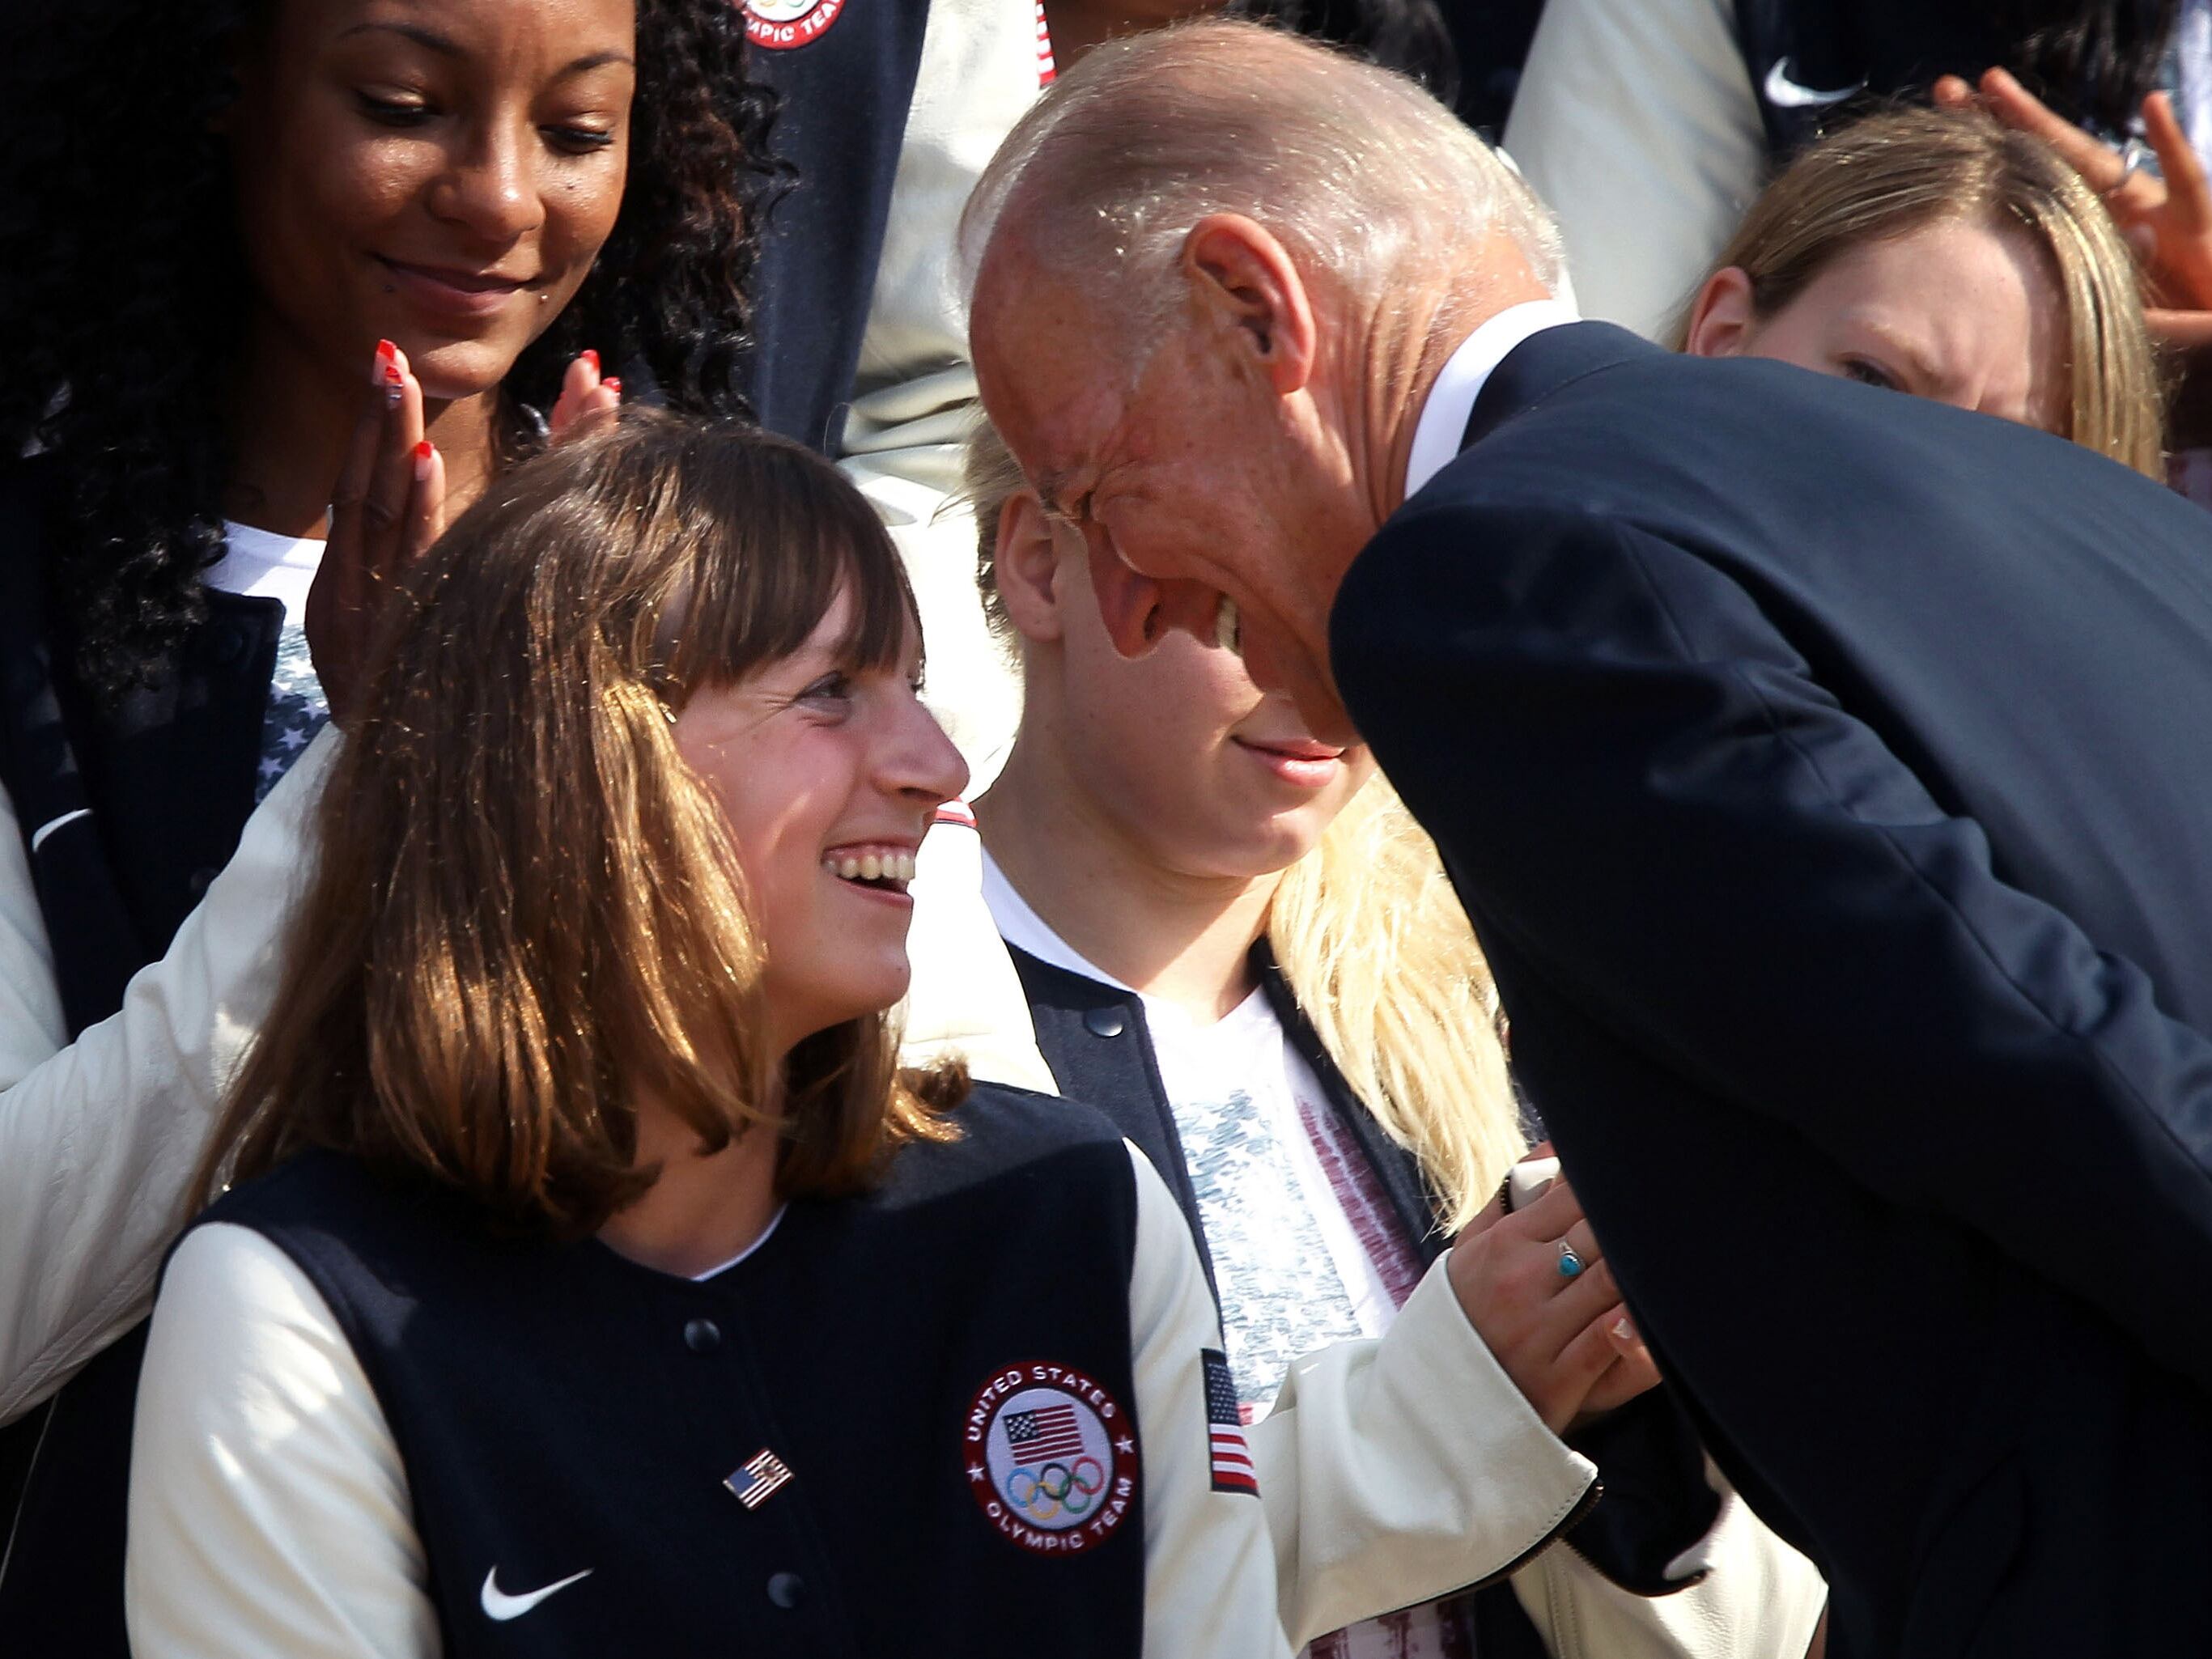 Olympic gold medal swimmer Katie Ledecky speaks with then-Vice President Biden during a White House event honoring Olympians on Sept. 14, 2012.